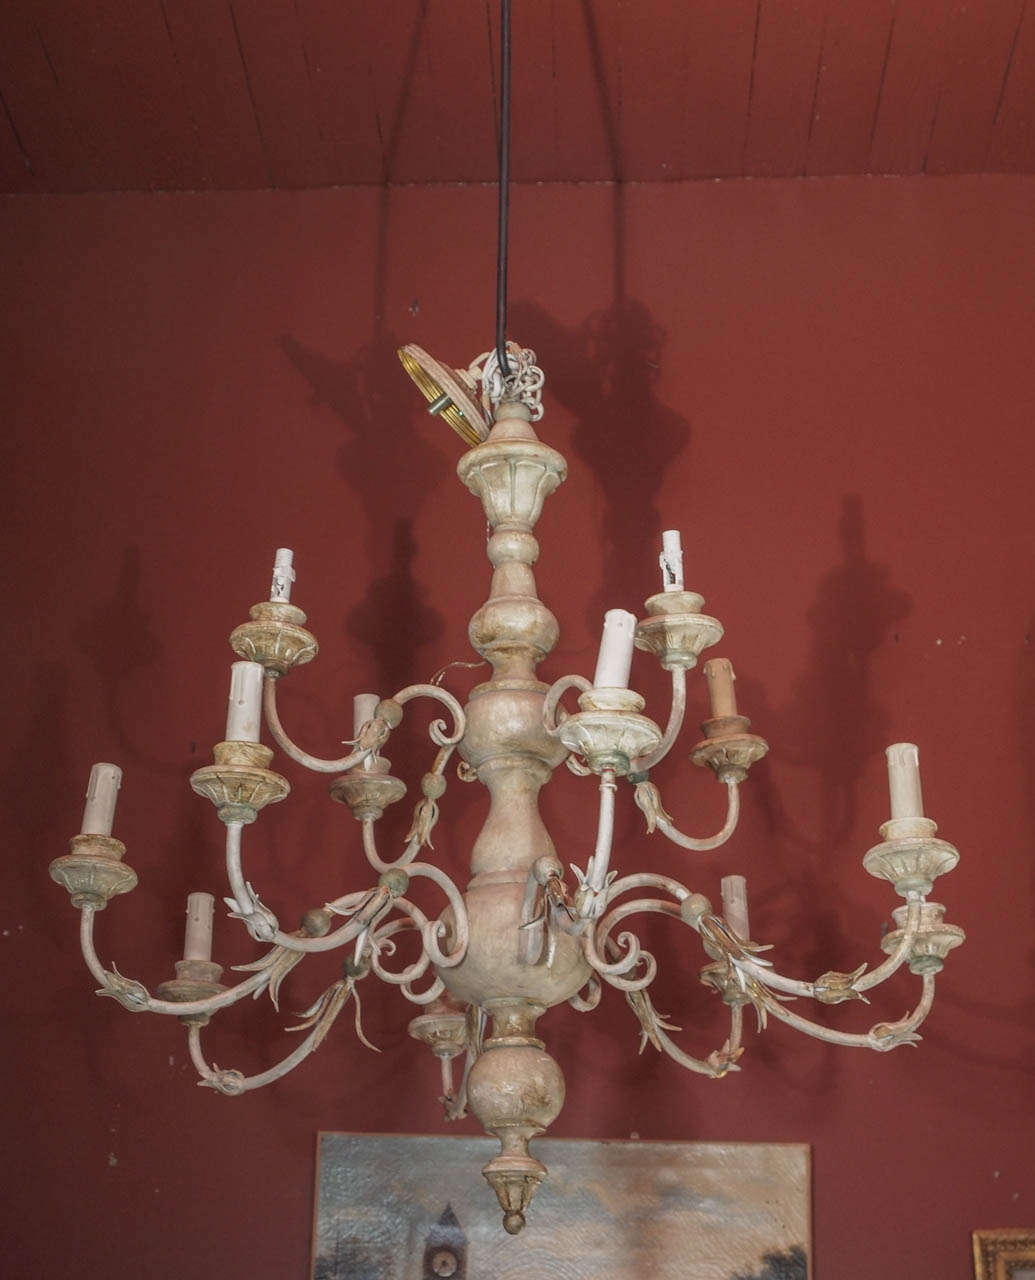 Double tiered painted wood and iron chandelier.  A wooden ball and small thin leaves adorn the 12 scrolled iron arms.  Chandelier is not yet wired for US use.
Cost of wiring will be added to stated price.